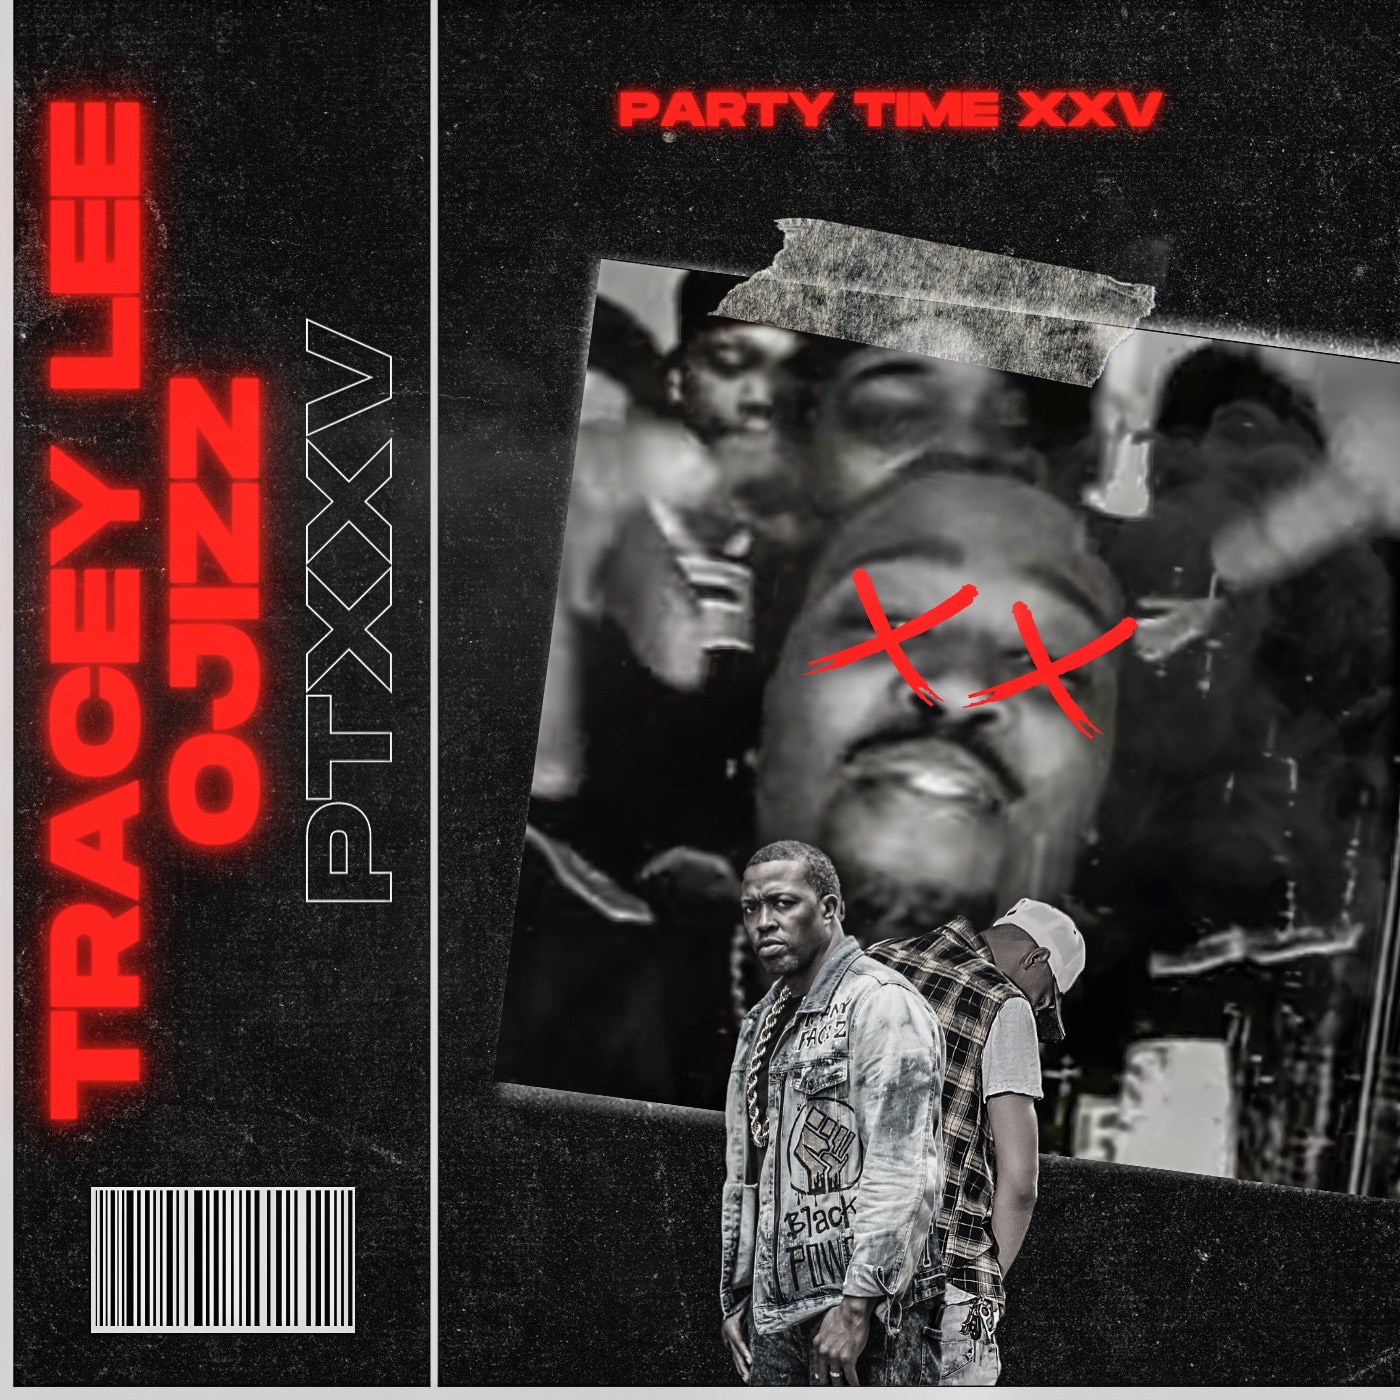 Art for Party Time XXV by Tracey Lee feat. Ojizz